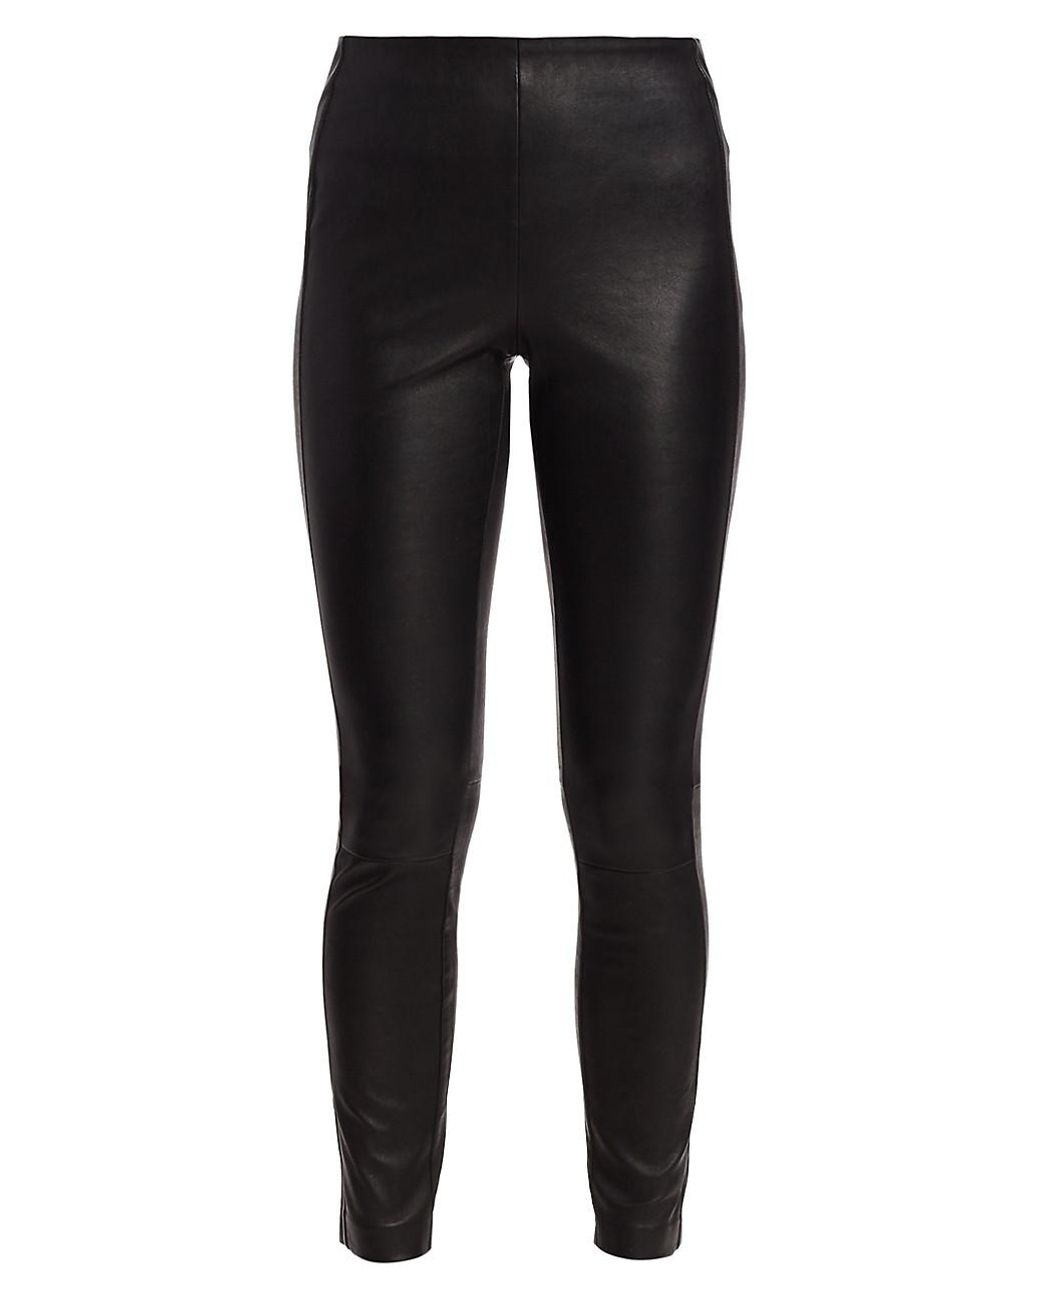 Rag & Bone Simone Leather Ankle Pants in Black - Save 70% - Lyst